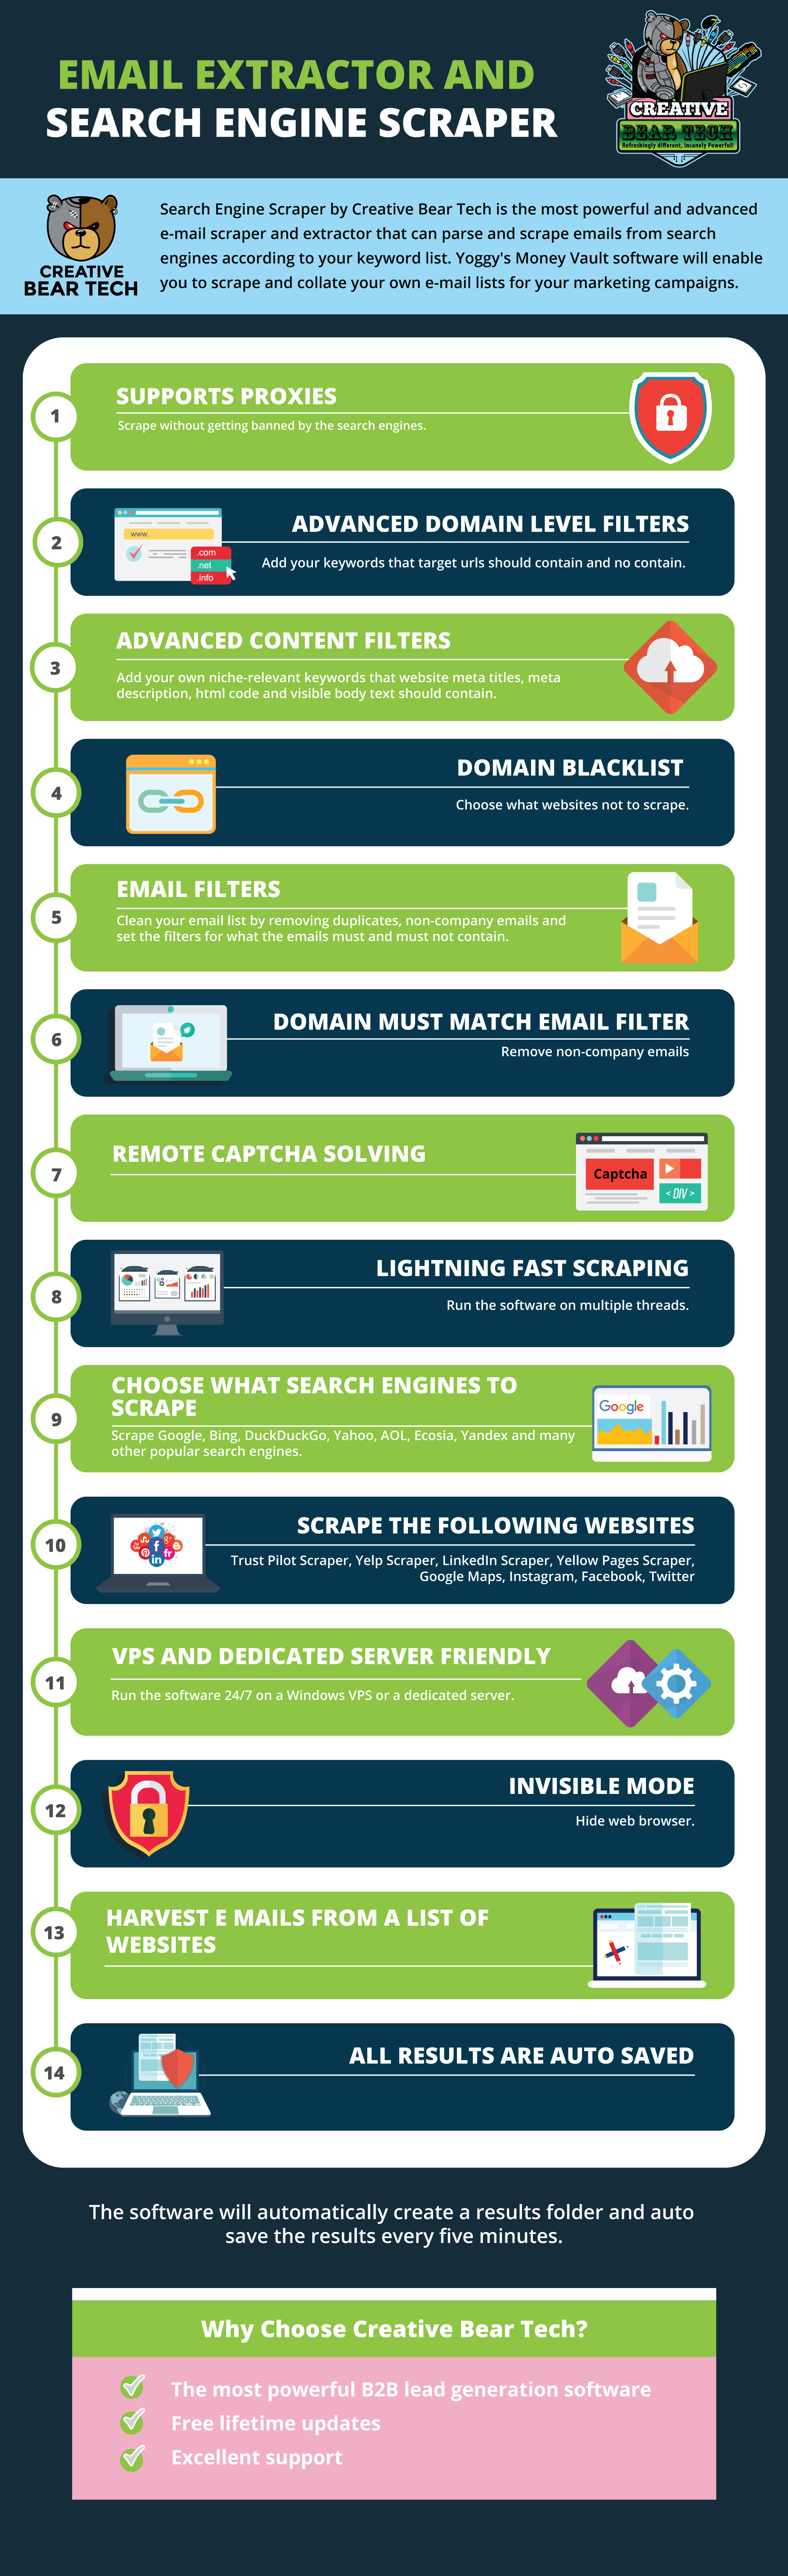 Search Engine Scraper and Email Extractor by Creative Bear Tech Infographic